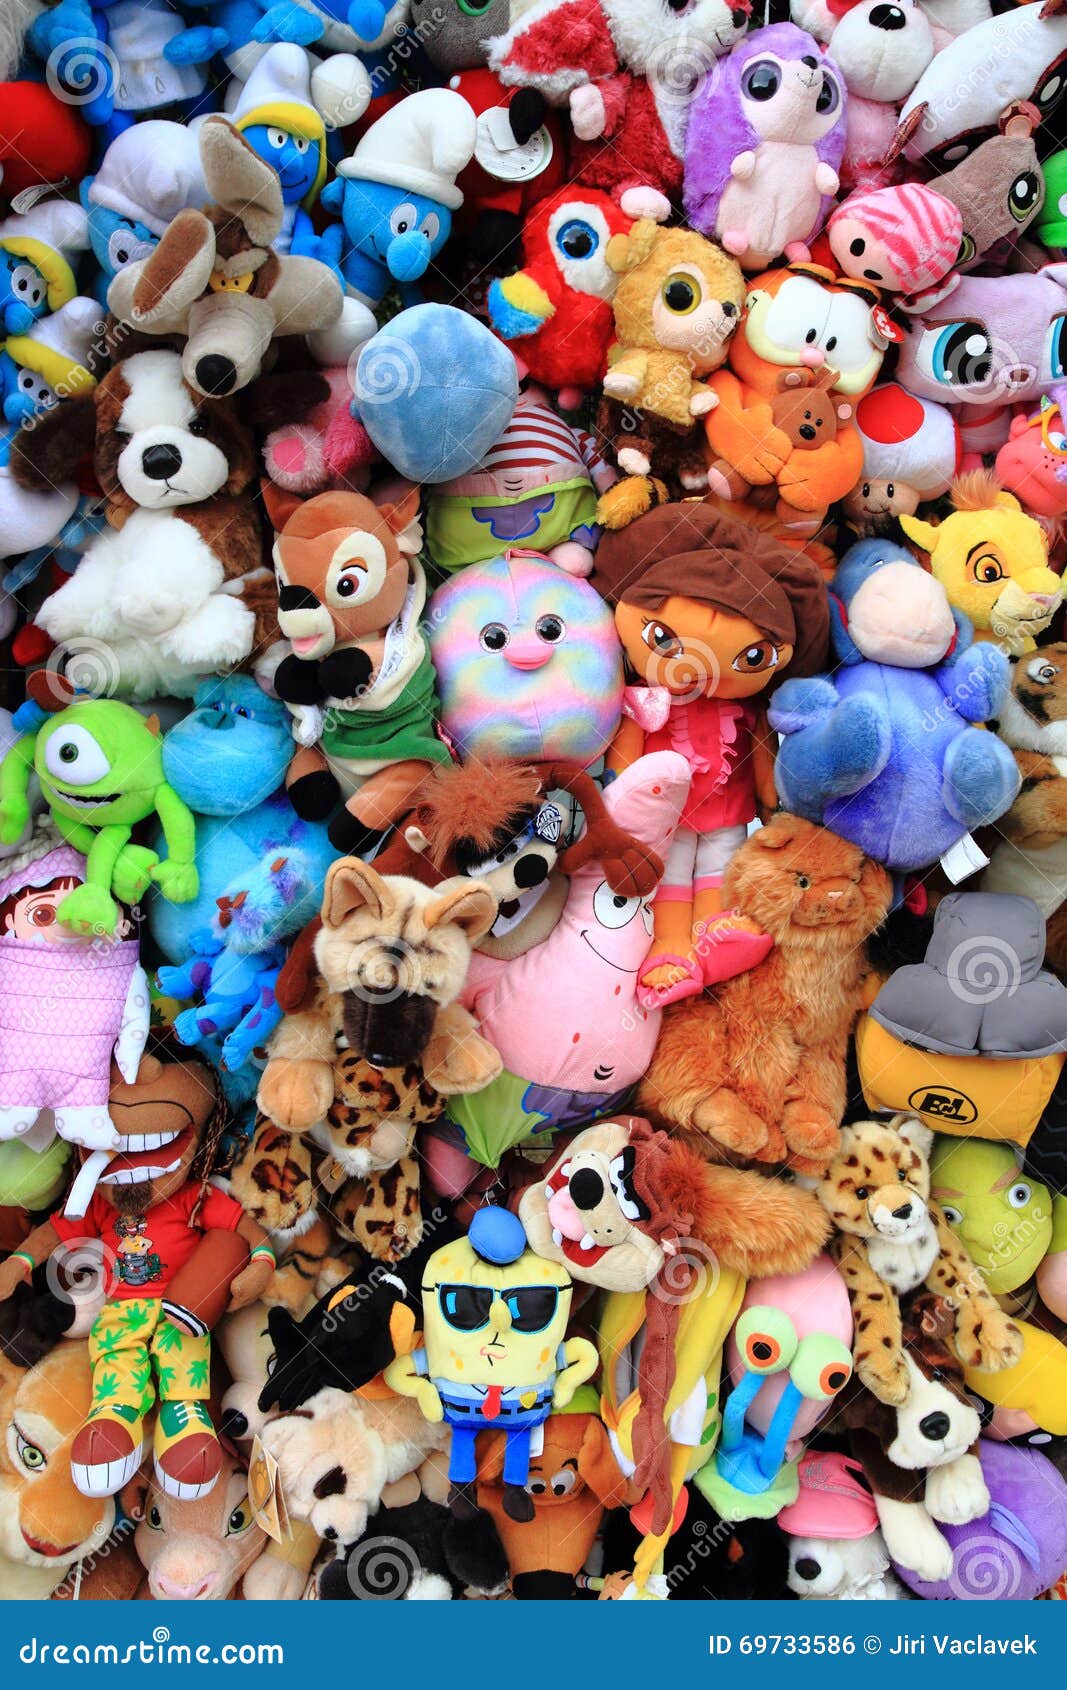 Cuddly toys collection stock photo. Image of softness - 69733586